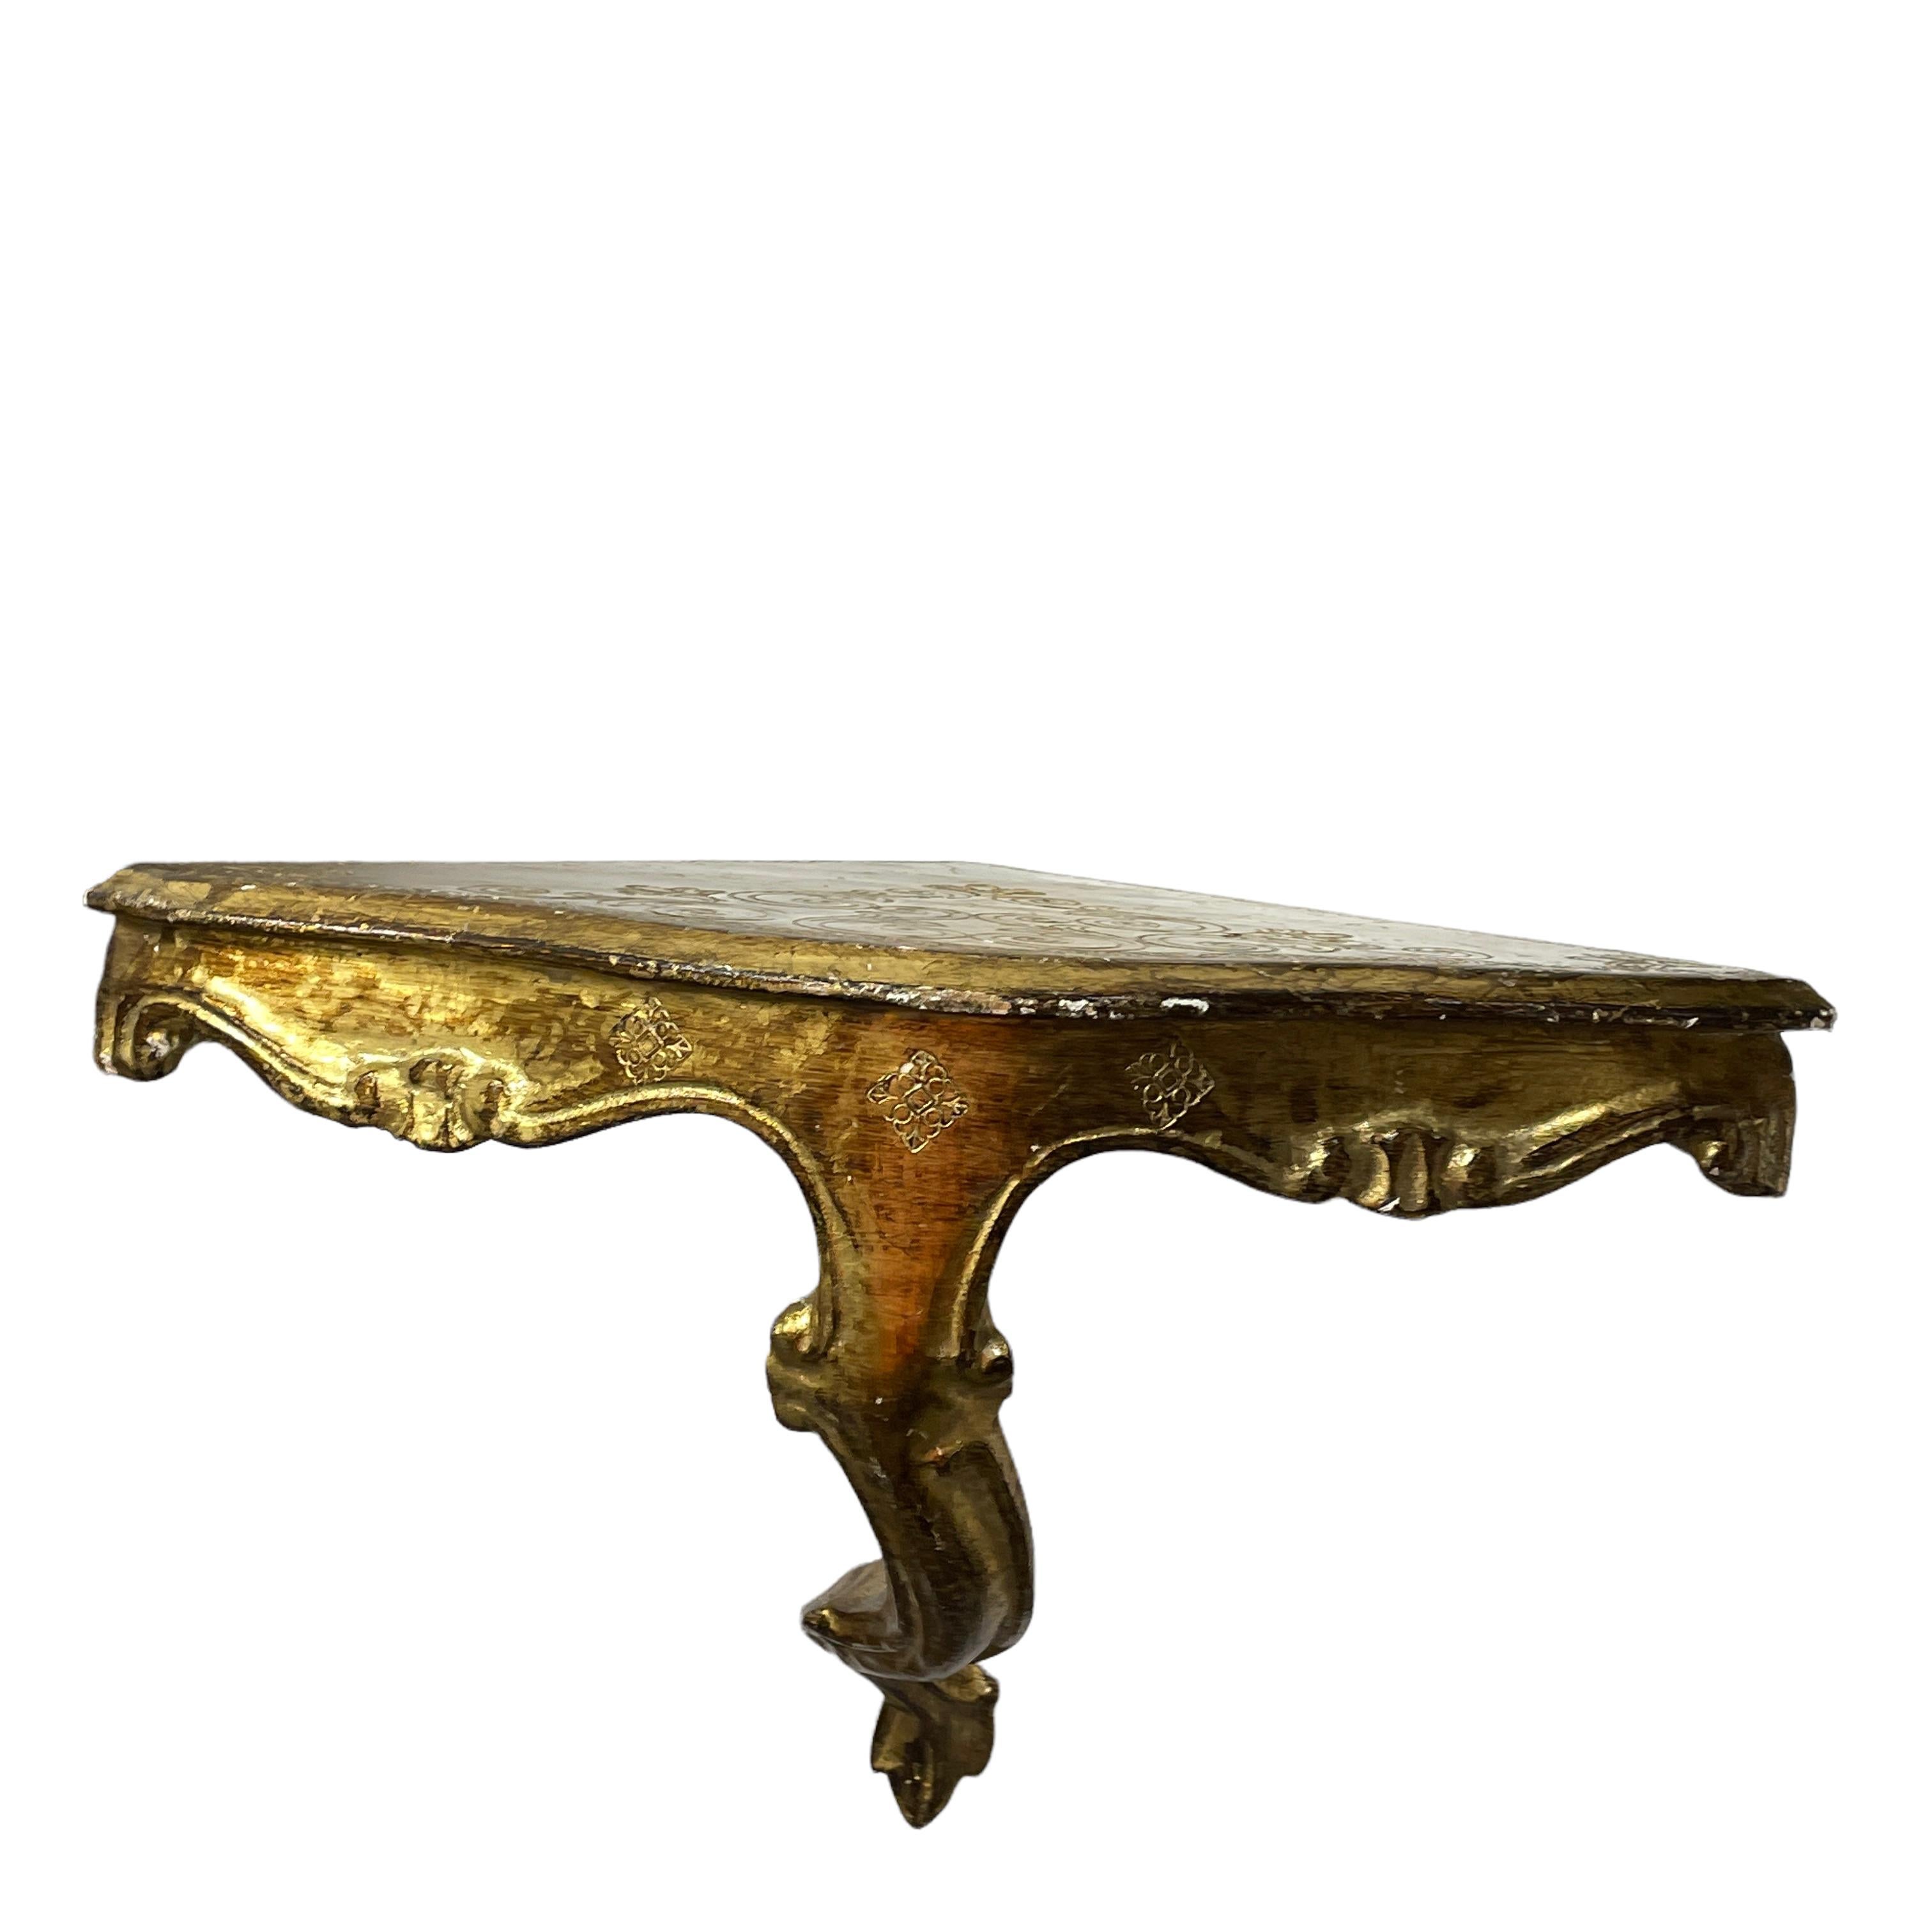 Vintage Florence Wall Corner Shelf Console, Gilded Carved Wood, Florentine Style For Sale 6